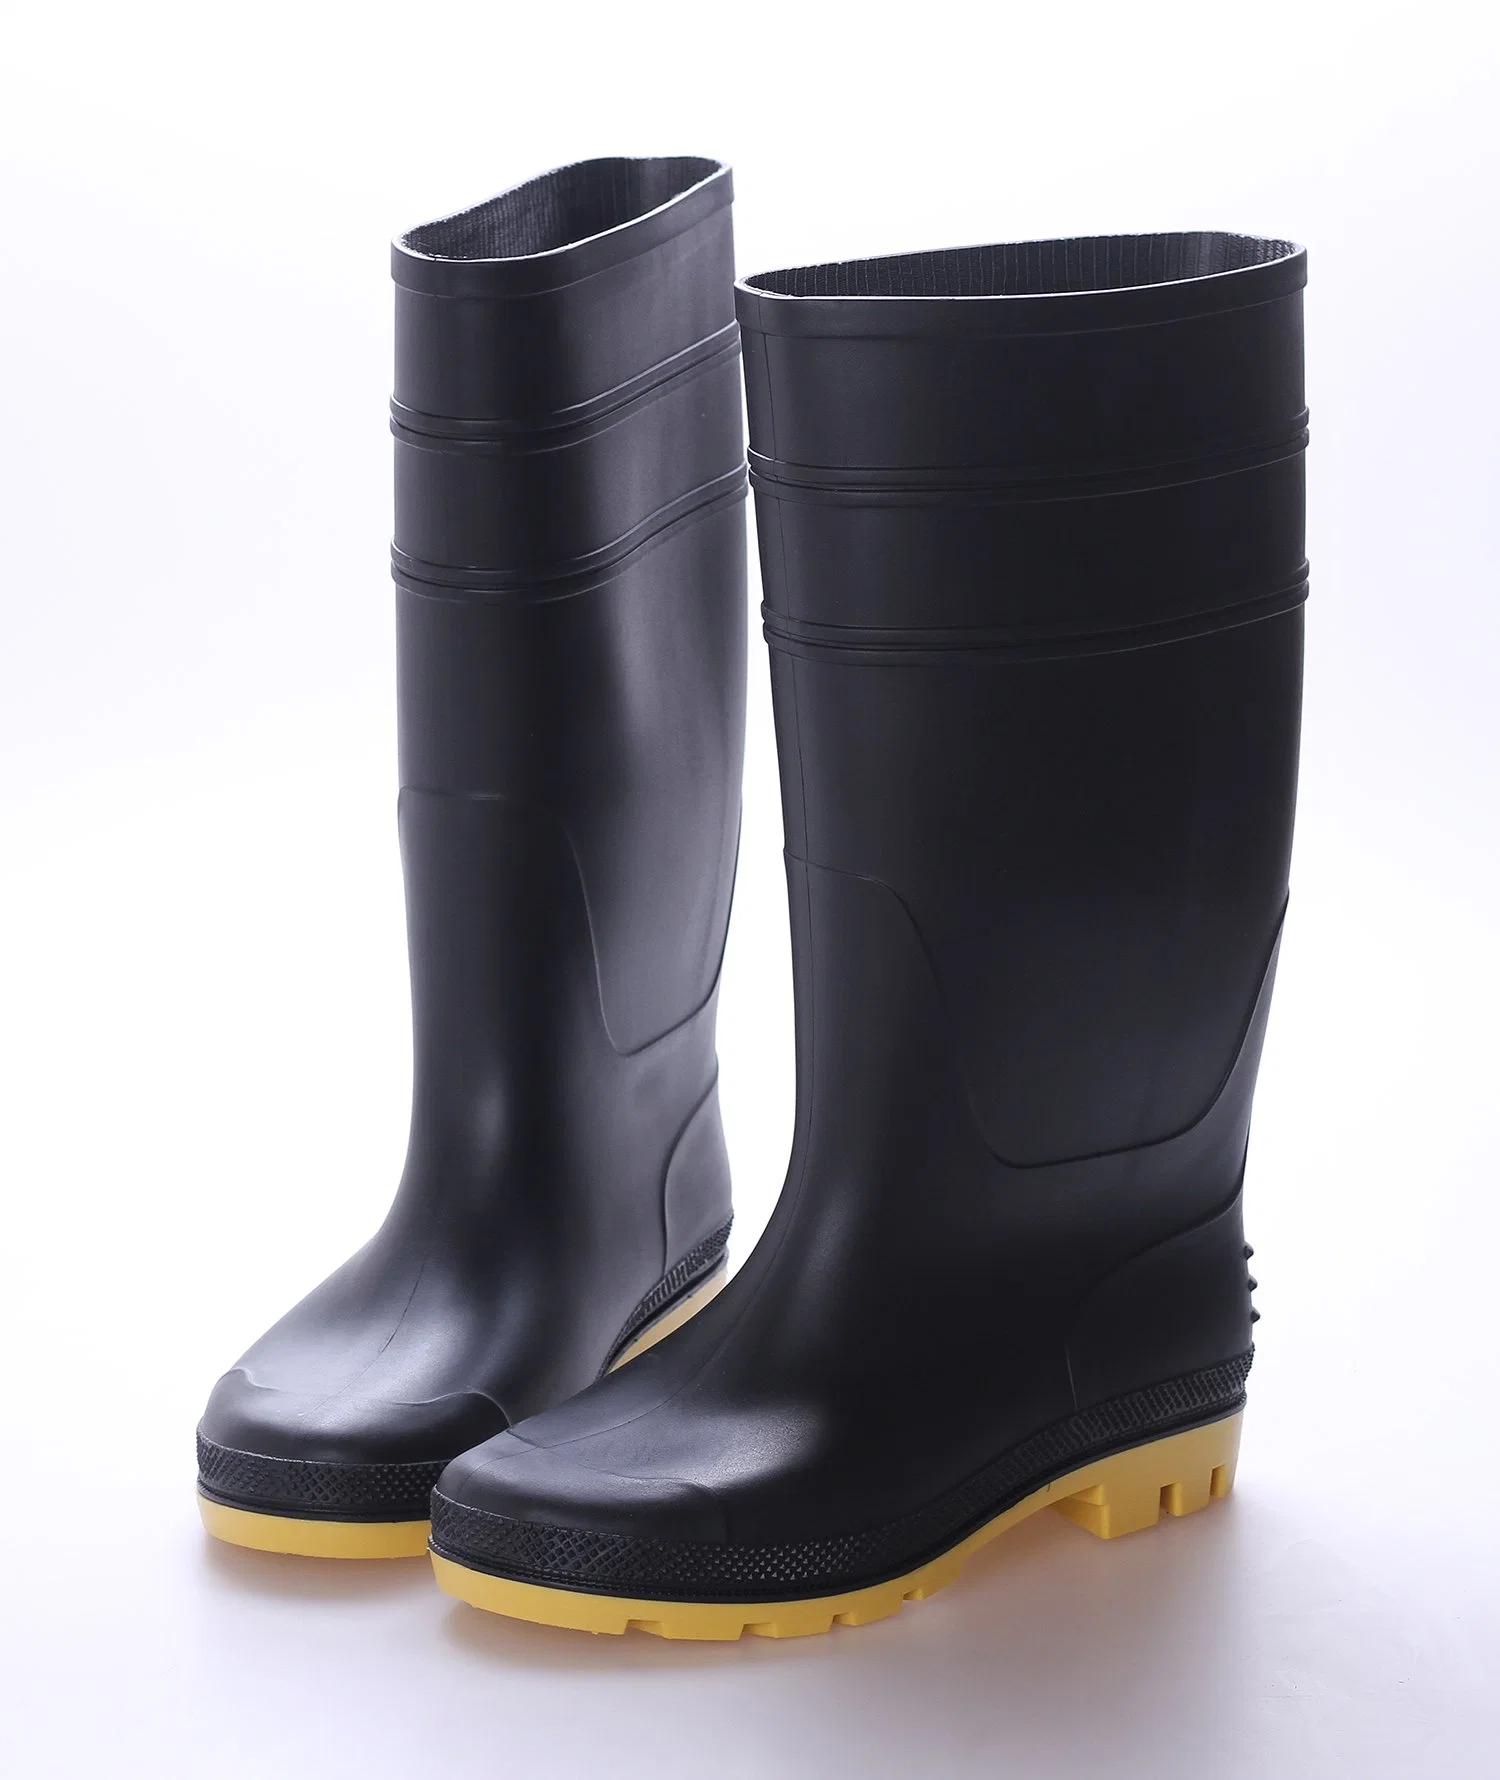 High Quality Safety PVC Rain Boots Waterproof Boots Working Rubber Shoes